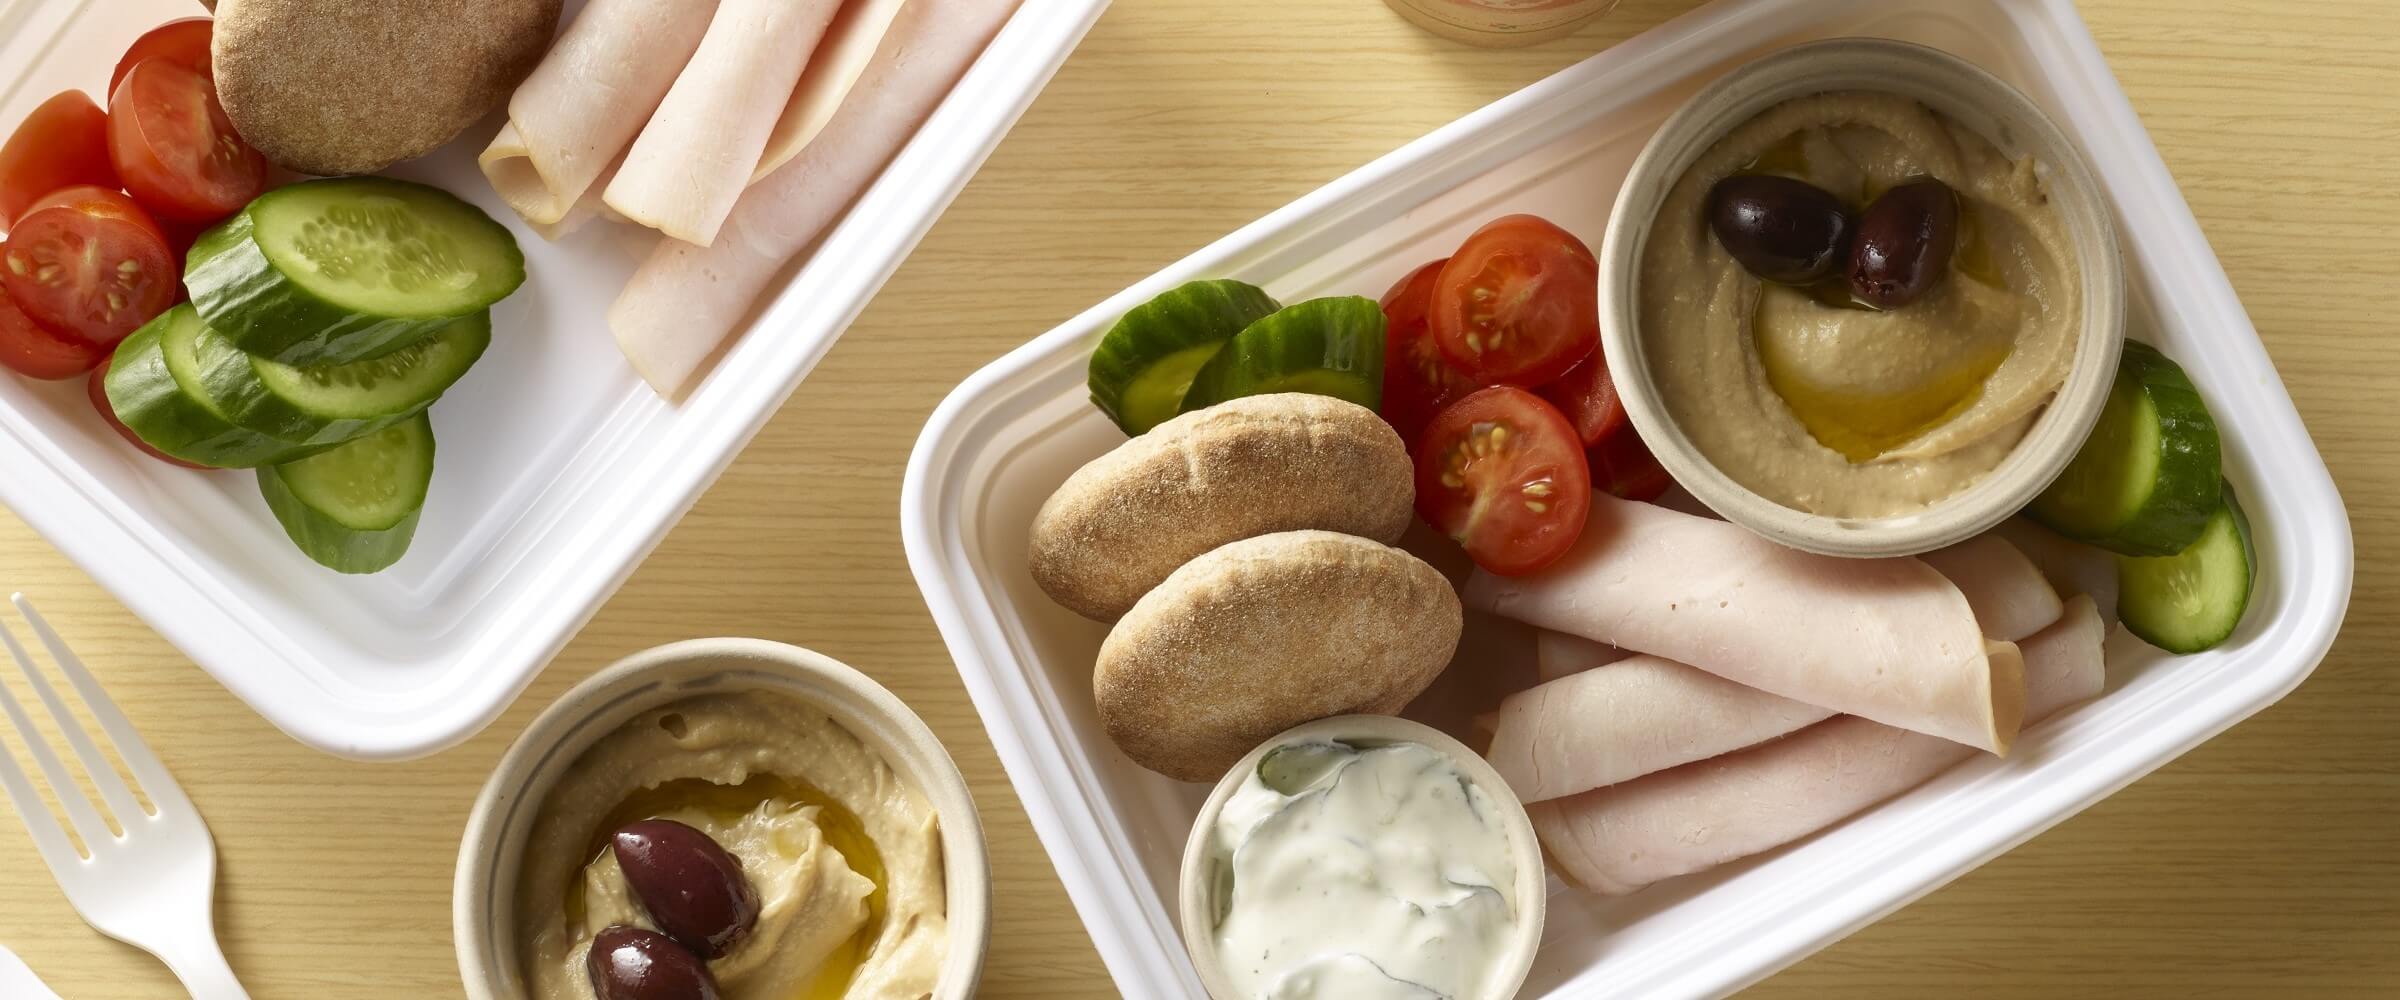 turkey med bento box with hummus, tomatoes, cucumbers, pita bread and dip